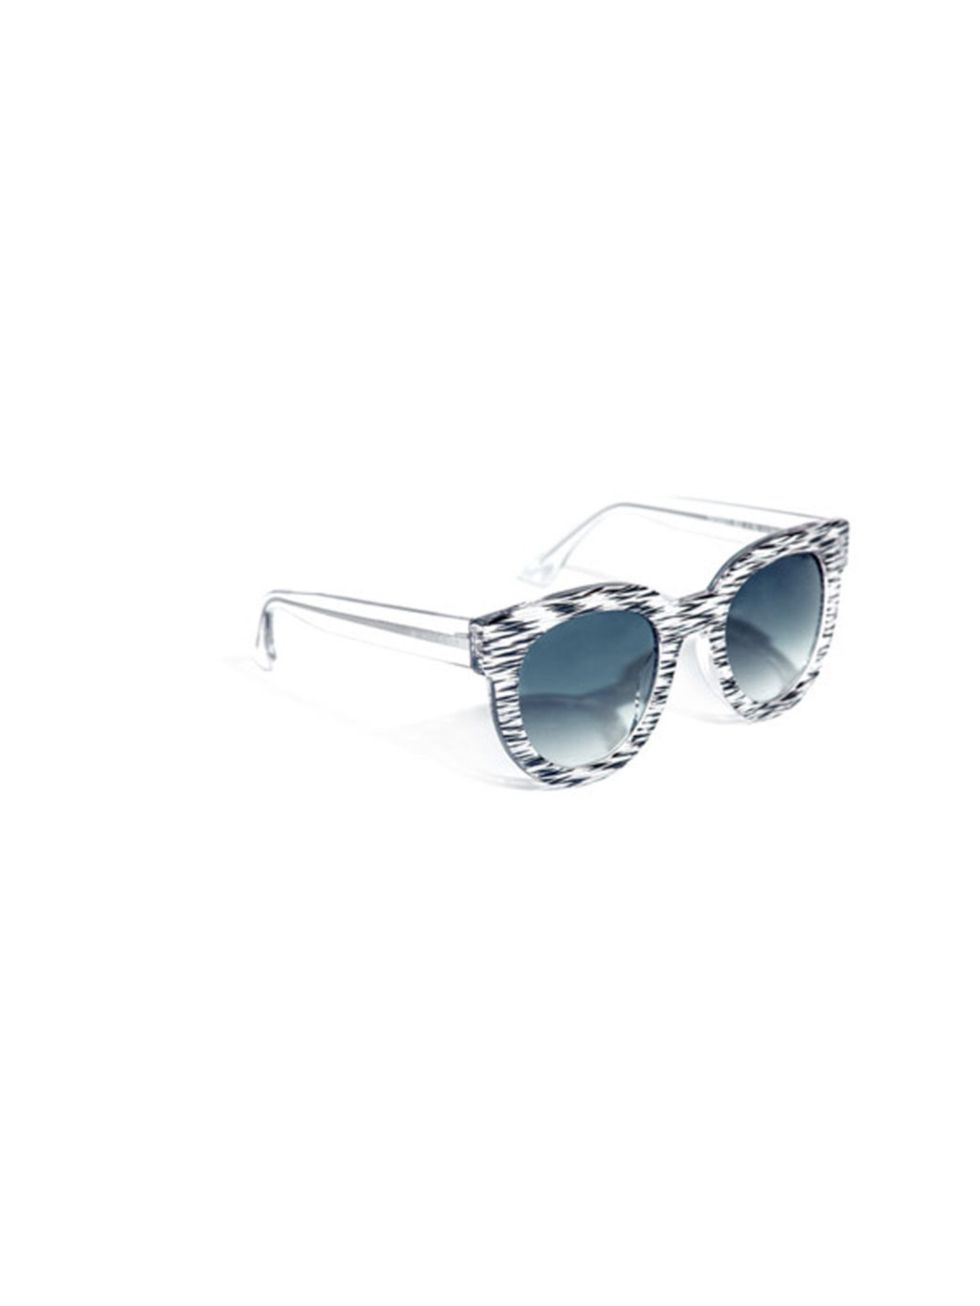 <p>Thierry Lasry 'Therapy' sunglasses, £260, at Matches</p><p><a href="http://shopping.elleuk.com/browse?fts=thierry+lasry+therapy+sunglasses">BUY NOW</a></p>